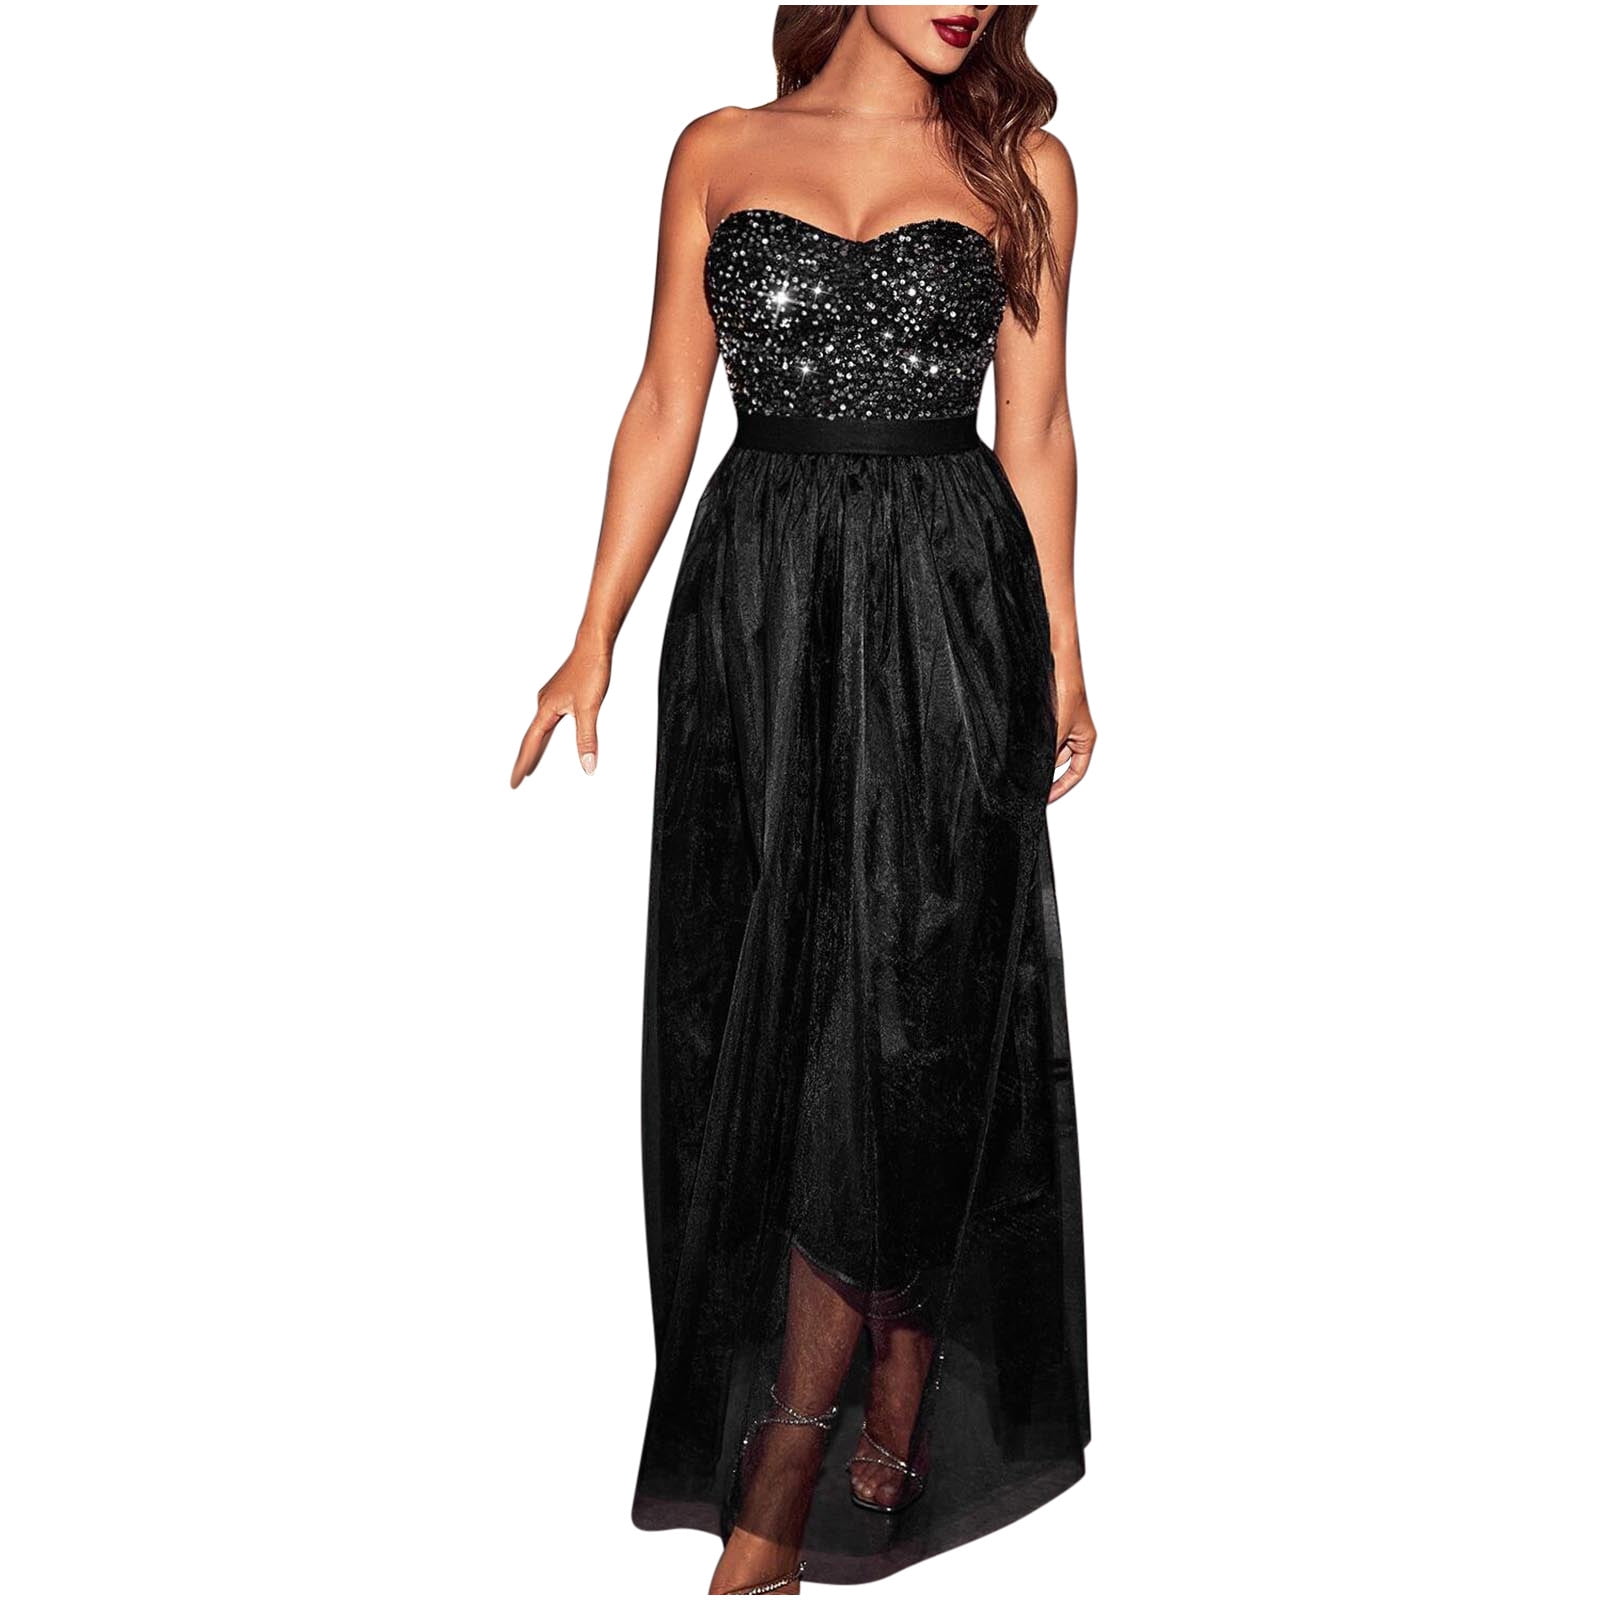 Buy Black Strapless Tube Top Dress at Social Butterfly Collection for only  $ 39.00